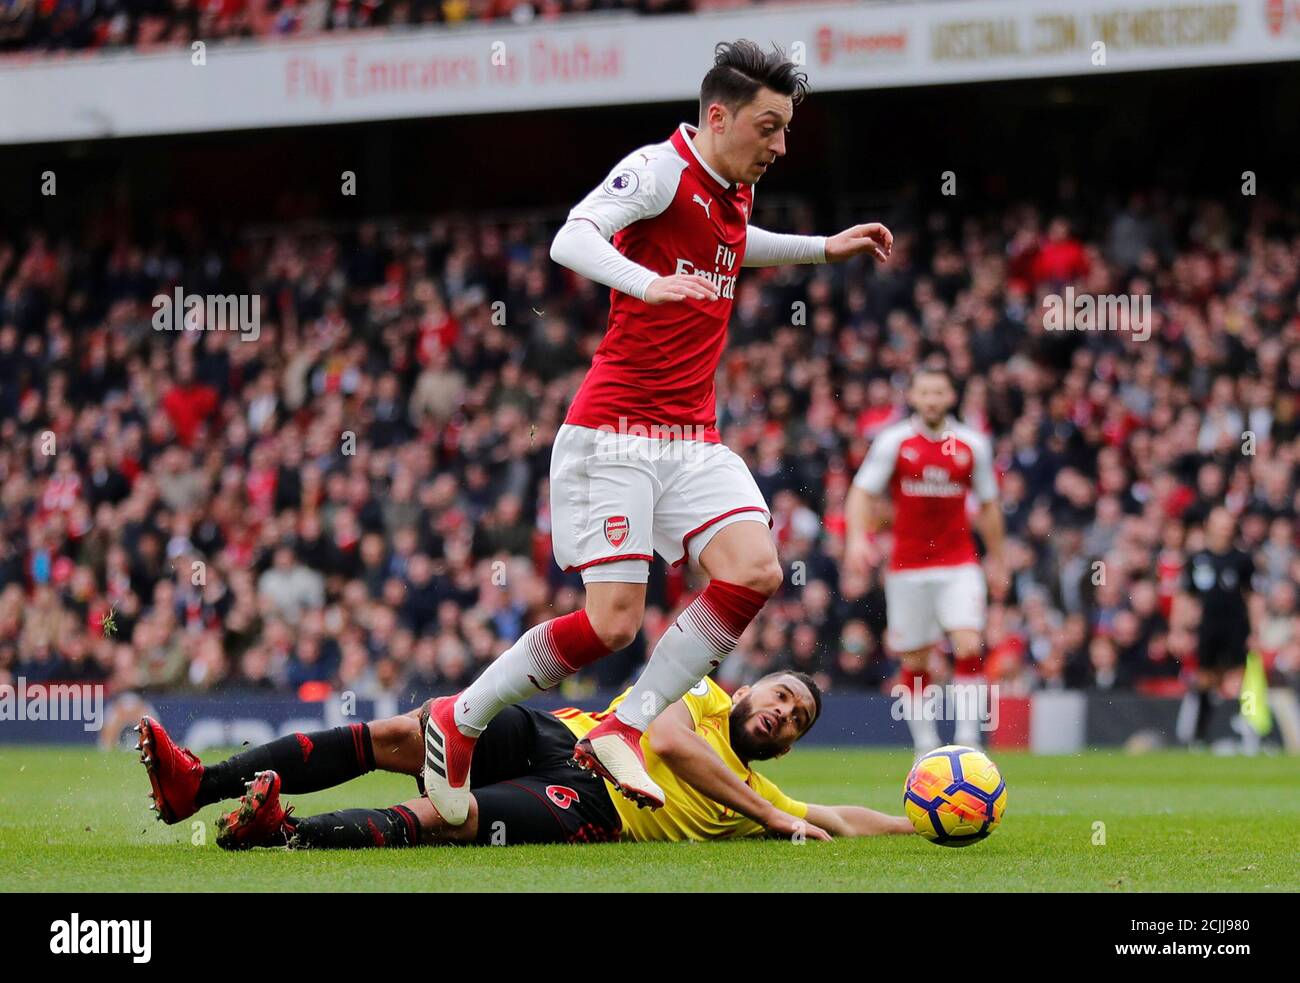 Soccer Football - Premier League - Arsenal vs Watford - Emirates Stadium, London, Britain - March 11, 2018   Arsenal's Mesut Ozil in action with Watford's Adrian Mariappa    REUTERS/Eddie Keogh    EDITORIAL USE ONLY. No use with unauthorized audio, video, data, fixture lists, club/league logos or 'live' services. Online in-match use limited to 75 images, no video emulation. No use in betting, games or single club/league/player publications.  Please contact your account representative for further details. Stock Photo